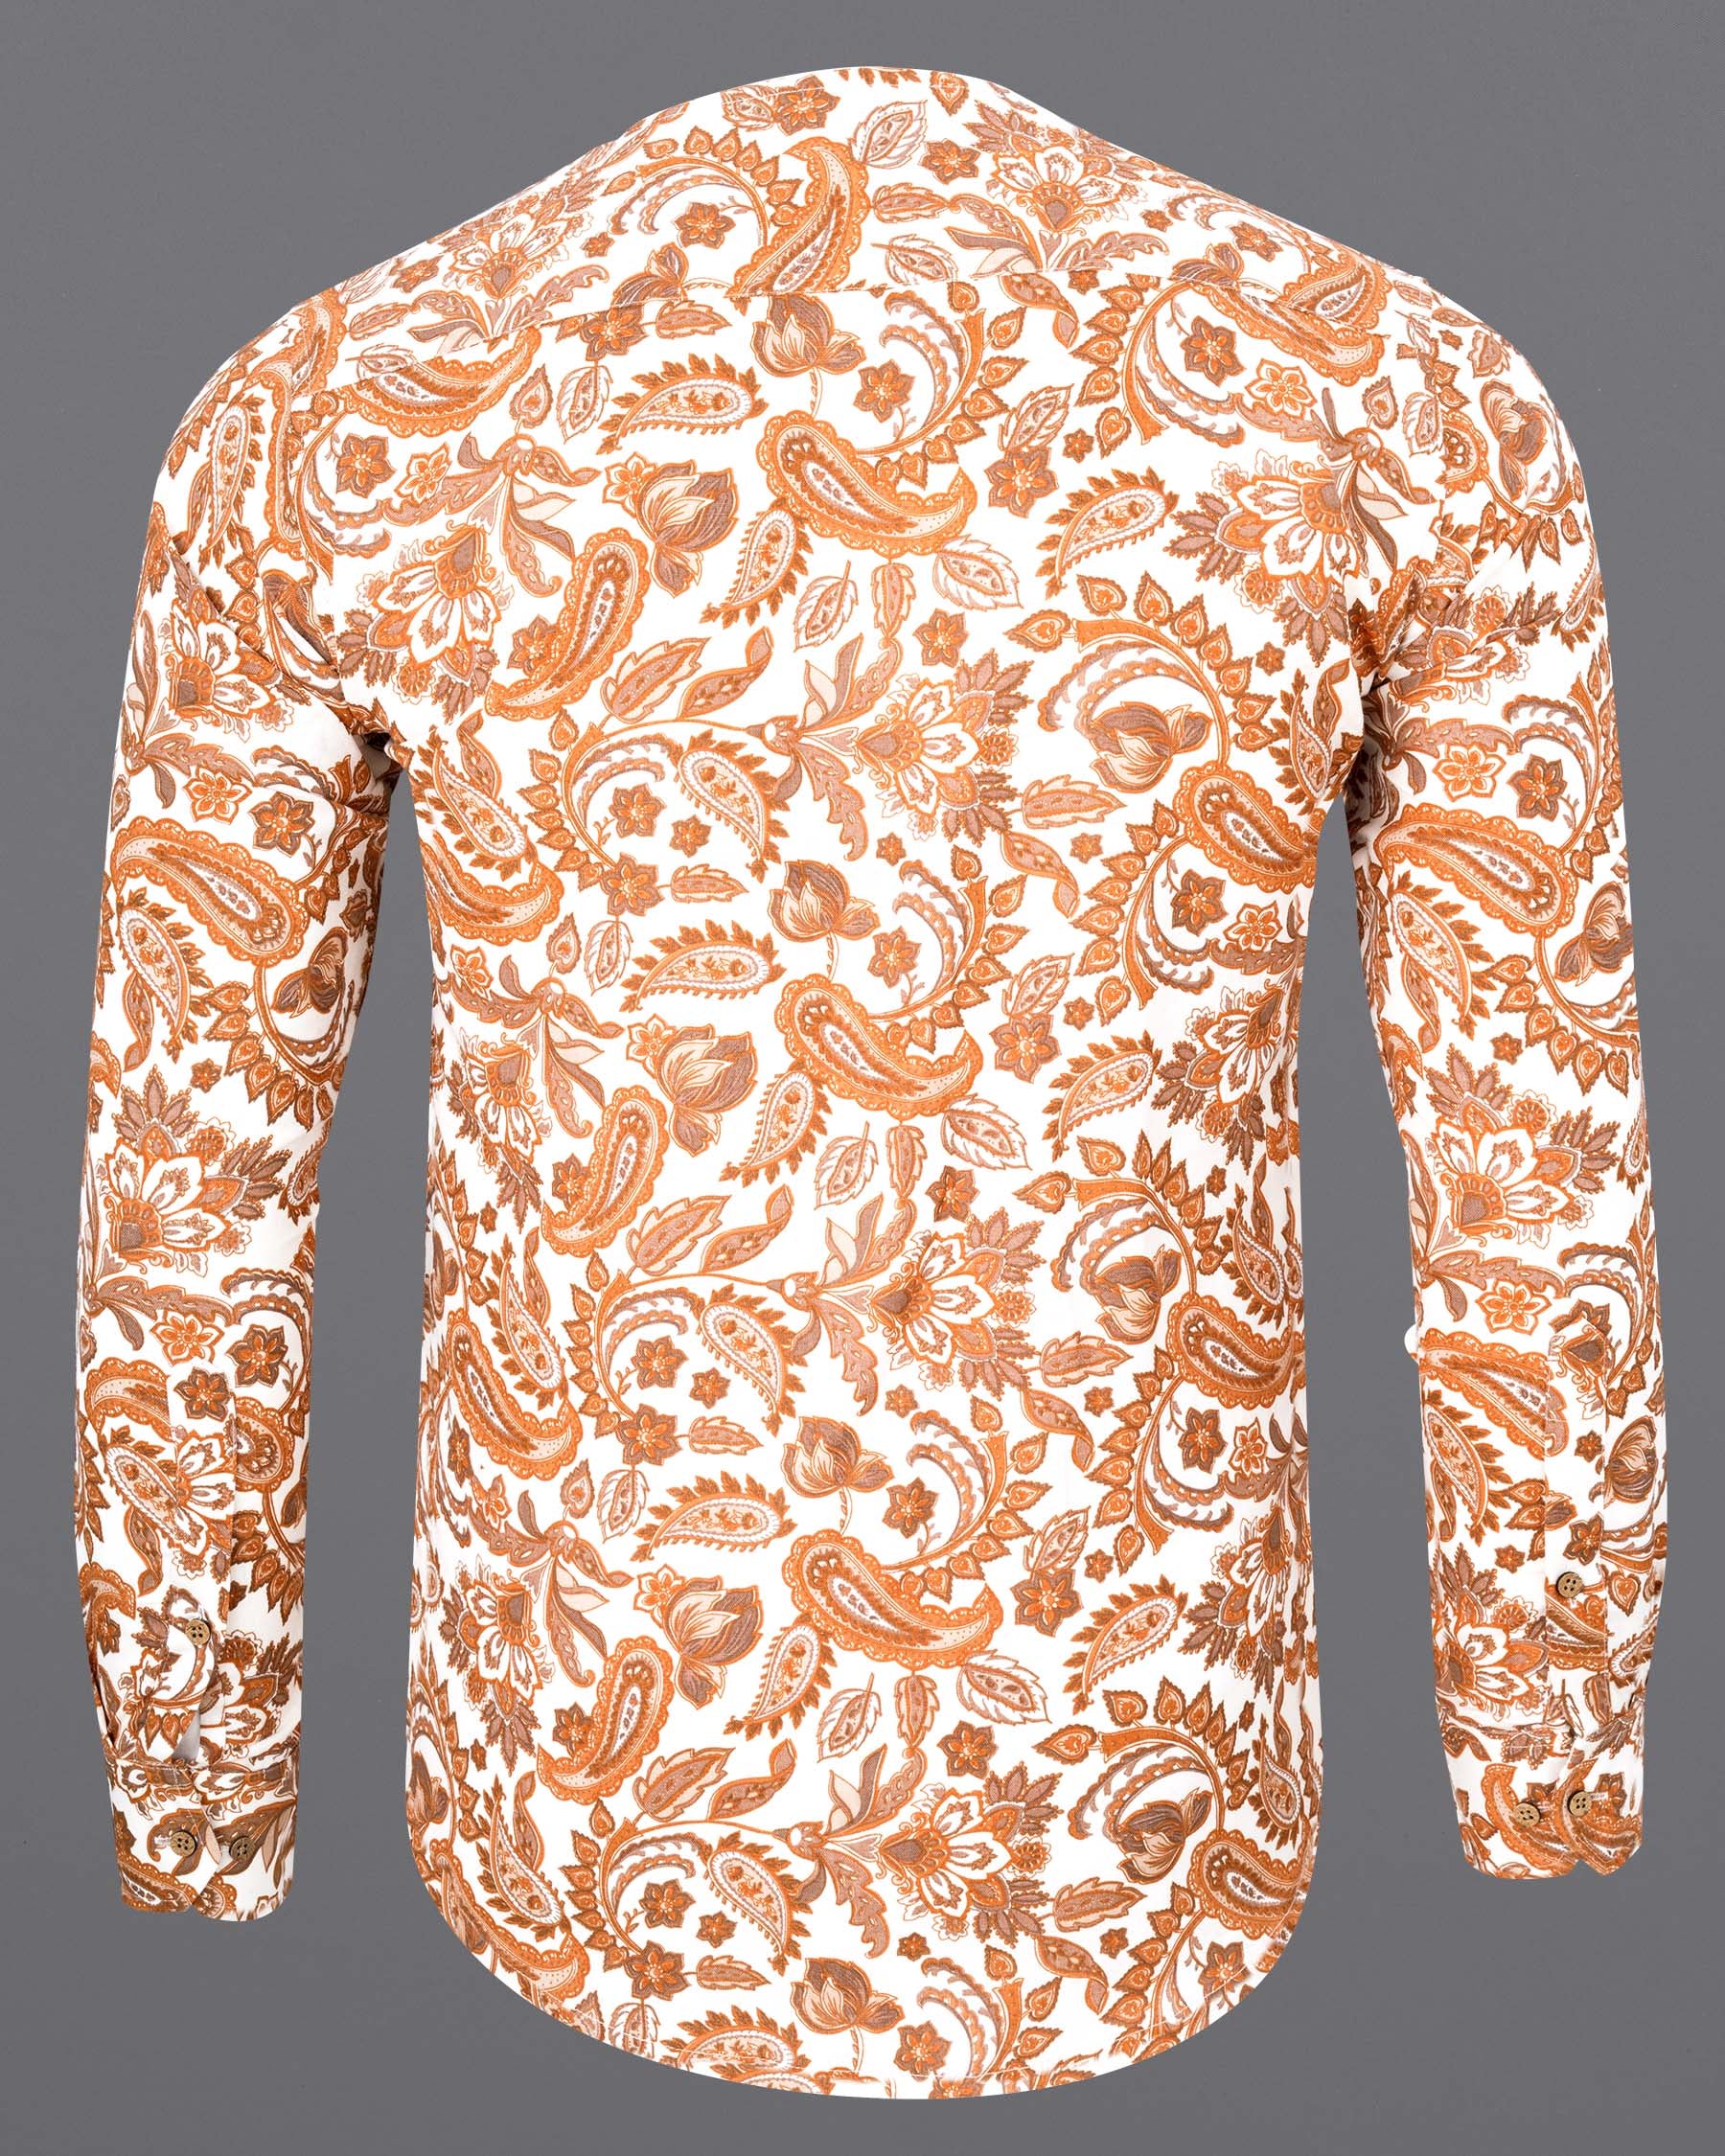 White Lilac and Pale Brown Paisley and Floral Printed Luxurious Linen Kurta Shirt 6844-WOC-38,6844-WOC-38,6844-WOC-39,6844-WOC-39,6844-WOC-40,6844-WOC-40,6844-WOC-42,6844-WOC-42,6844-WOC-44,6844-WOC-44,6844-WOC-46,6844-WOC-46,6844-WOC-48,6844-WOC-48,6844-WOC-50,6844-WOC-50,6844-WOC-52,6844-WOC-52